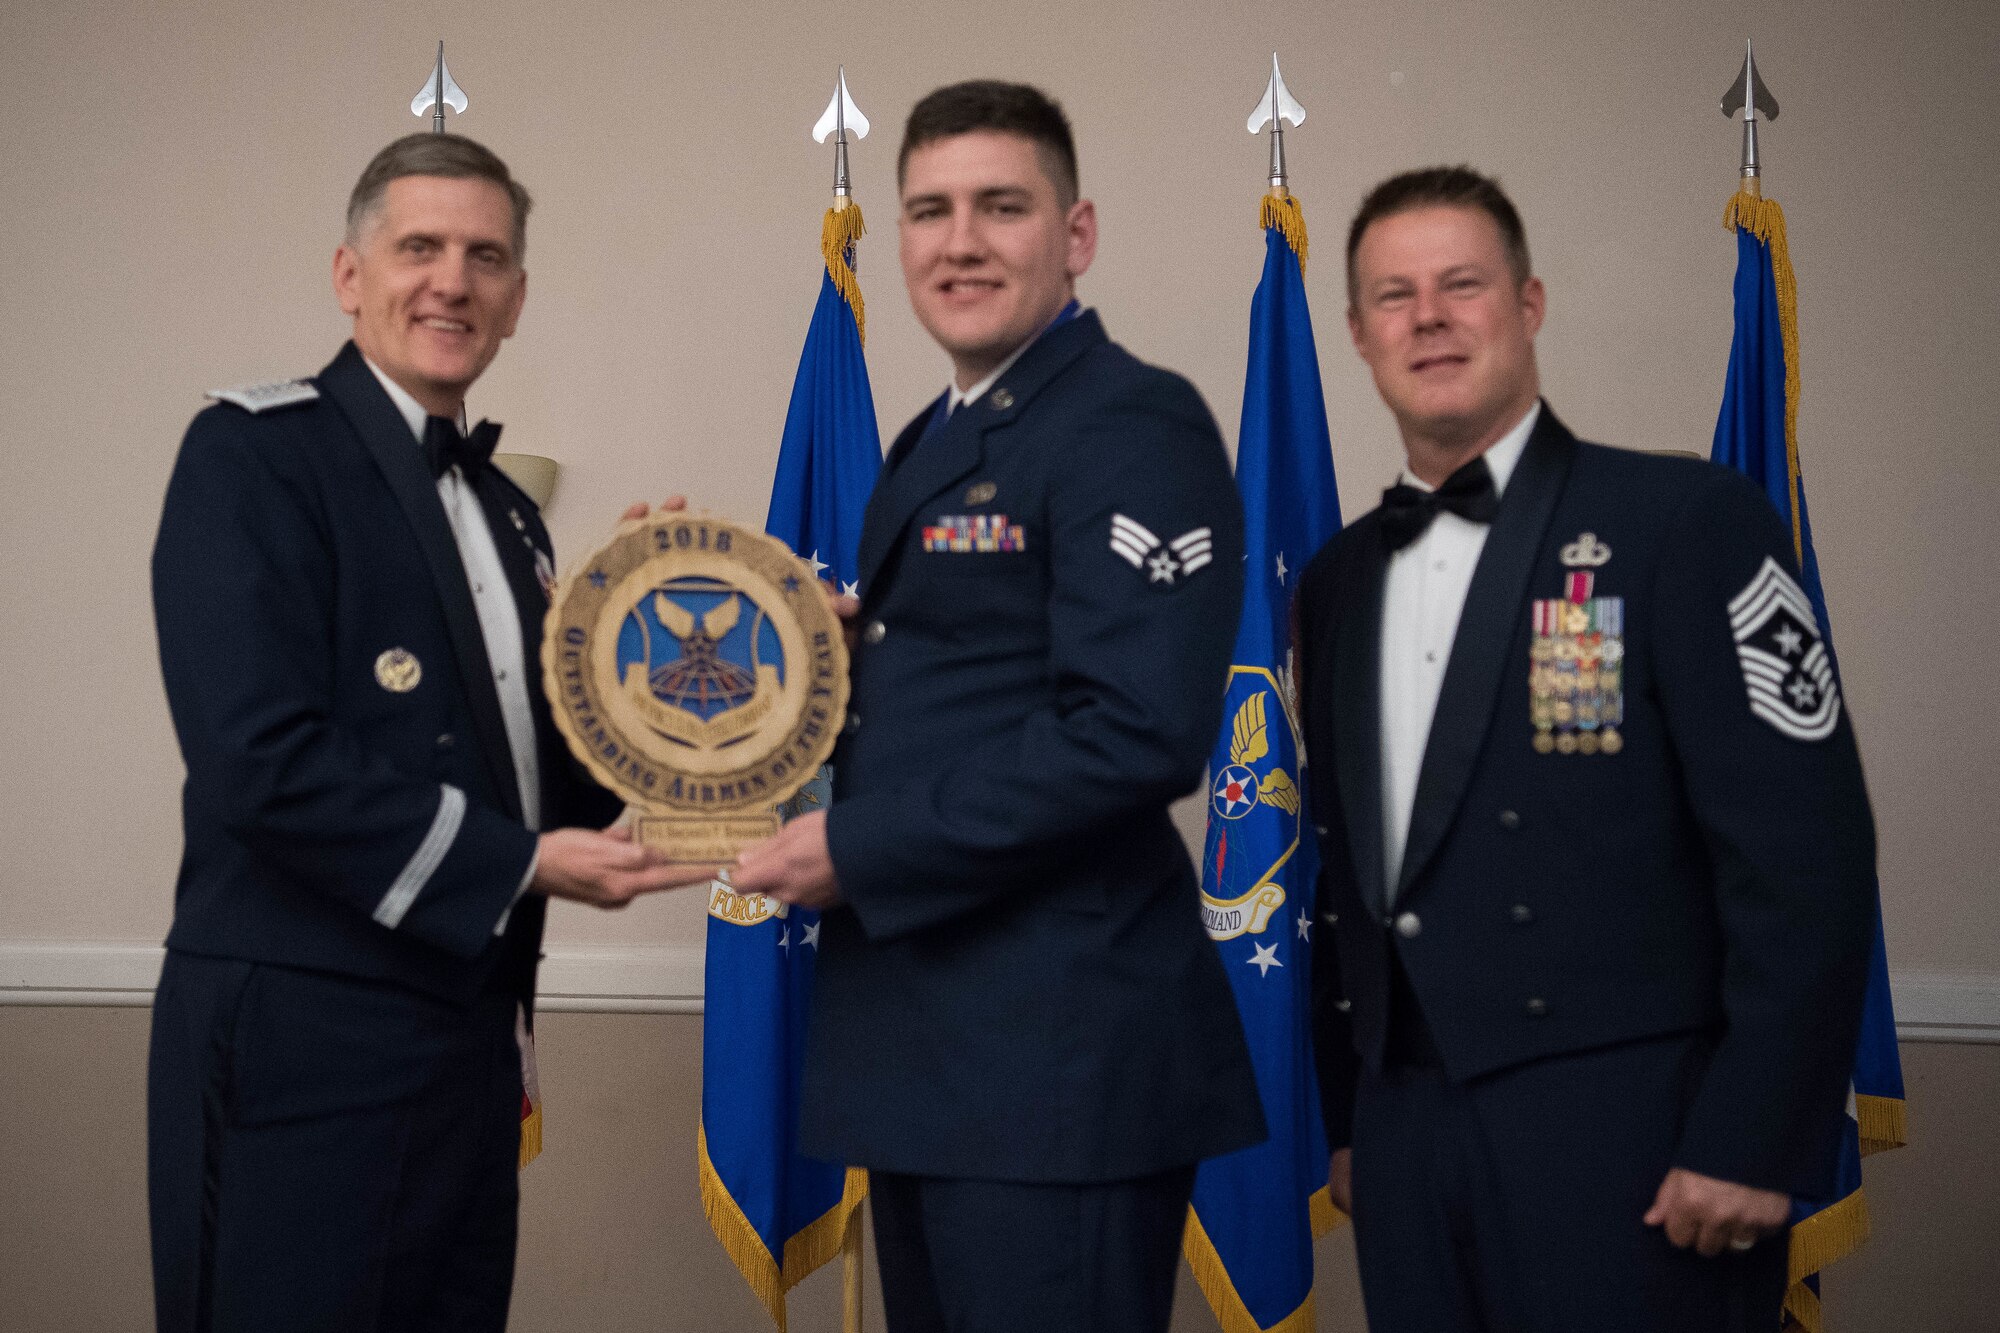 U.S. Air Force Senior Airman Benjamin P. Broussard (middle), 28th Operations Support Squadron, target analyst at Ellsworth Air Force Base, S.D., receives an Air Force Global Strike Command Outstanding Airmen of the Year award April 15, 2019, at Barksdale Air Force Base, La. The OAY award was awarded to six Airmen throughout AFGSC. (U.S. Air Force photo by Airman Jacob B. Wrightsman)